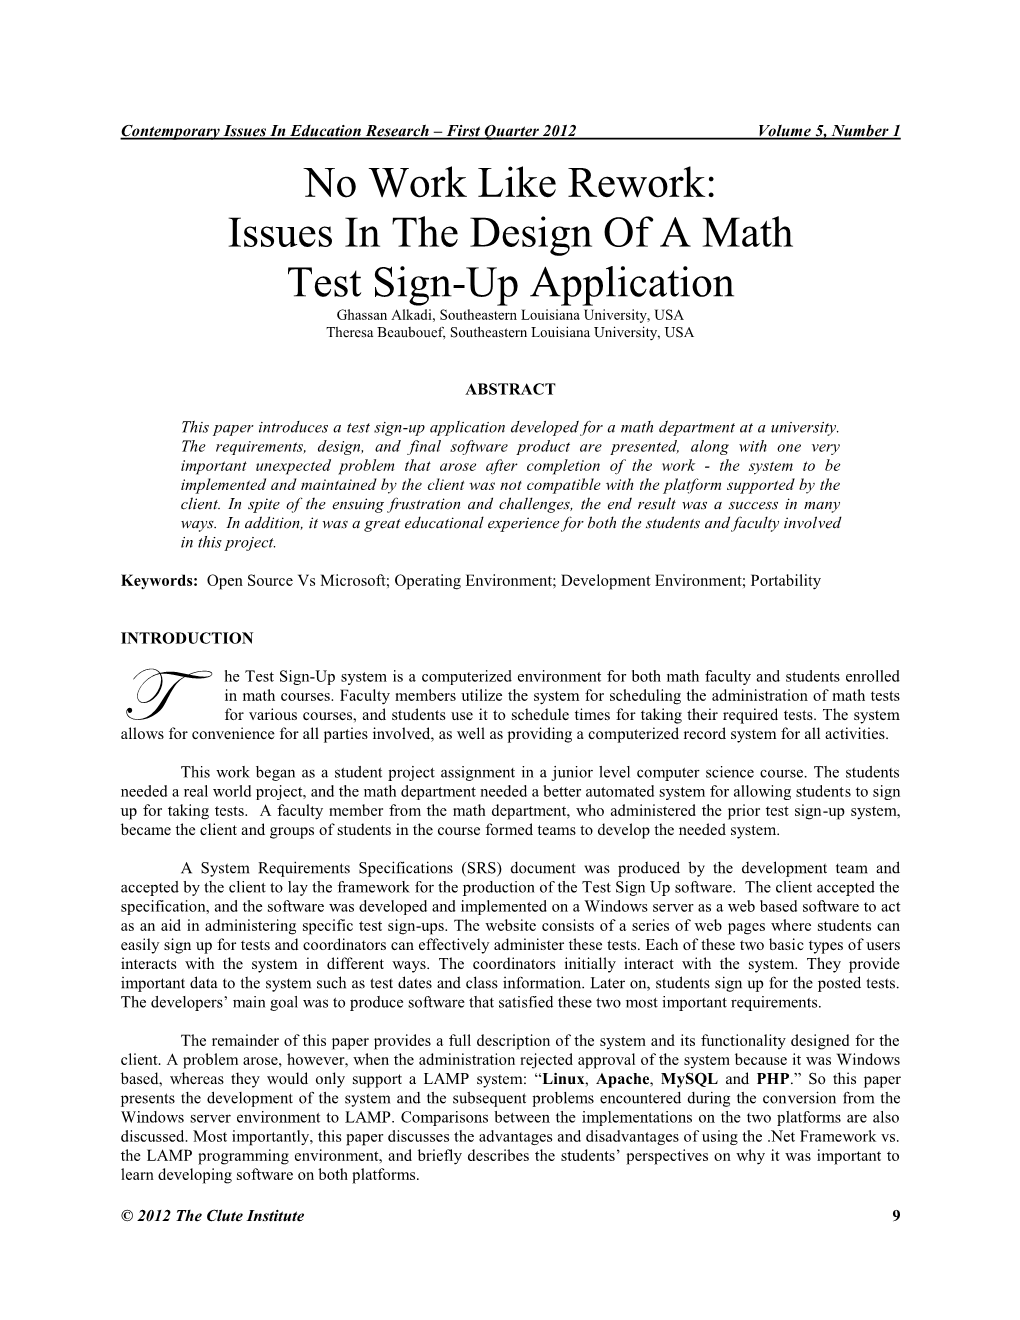 No Work Like Rework: Issues in the Design of a Math Test Sign-Up